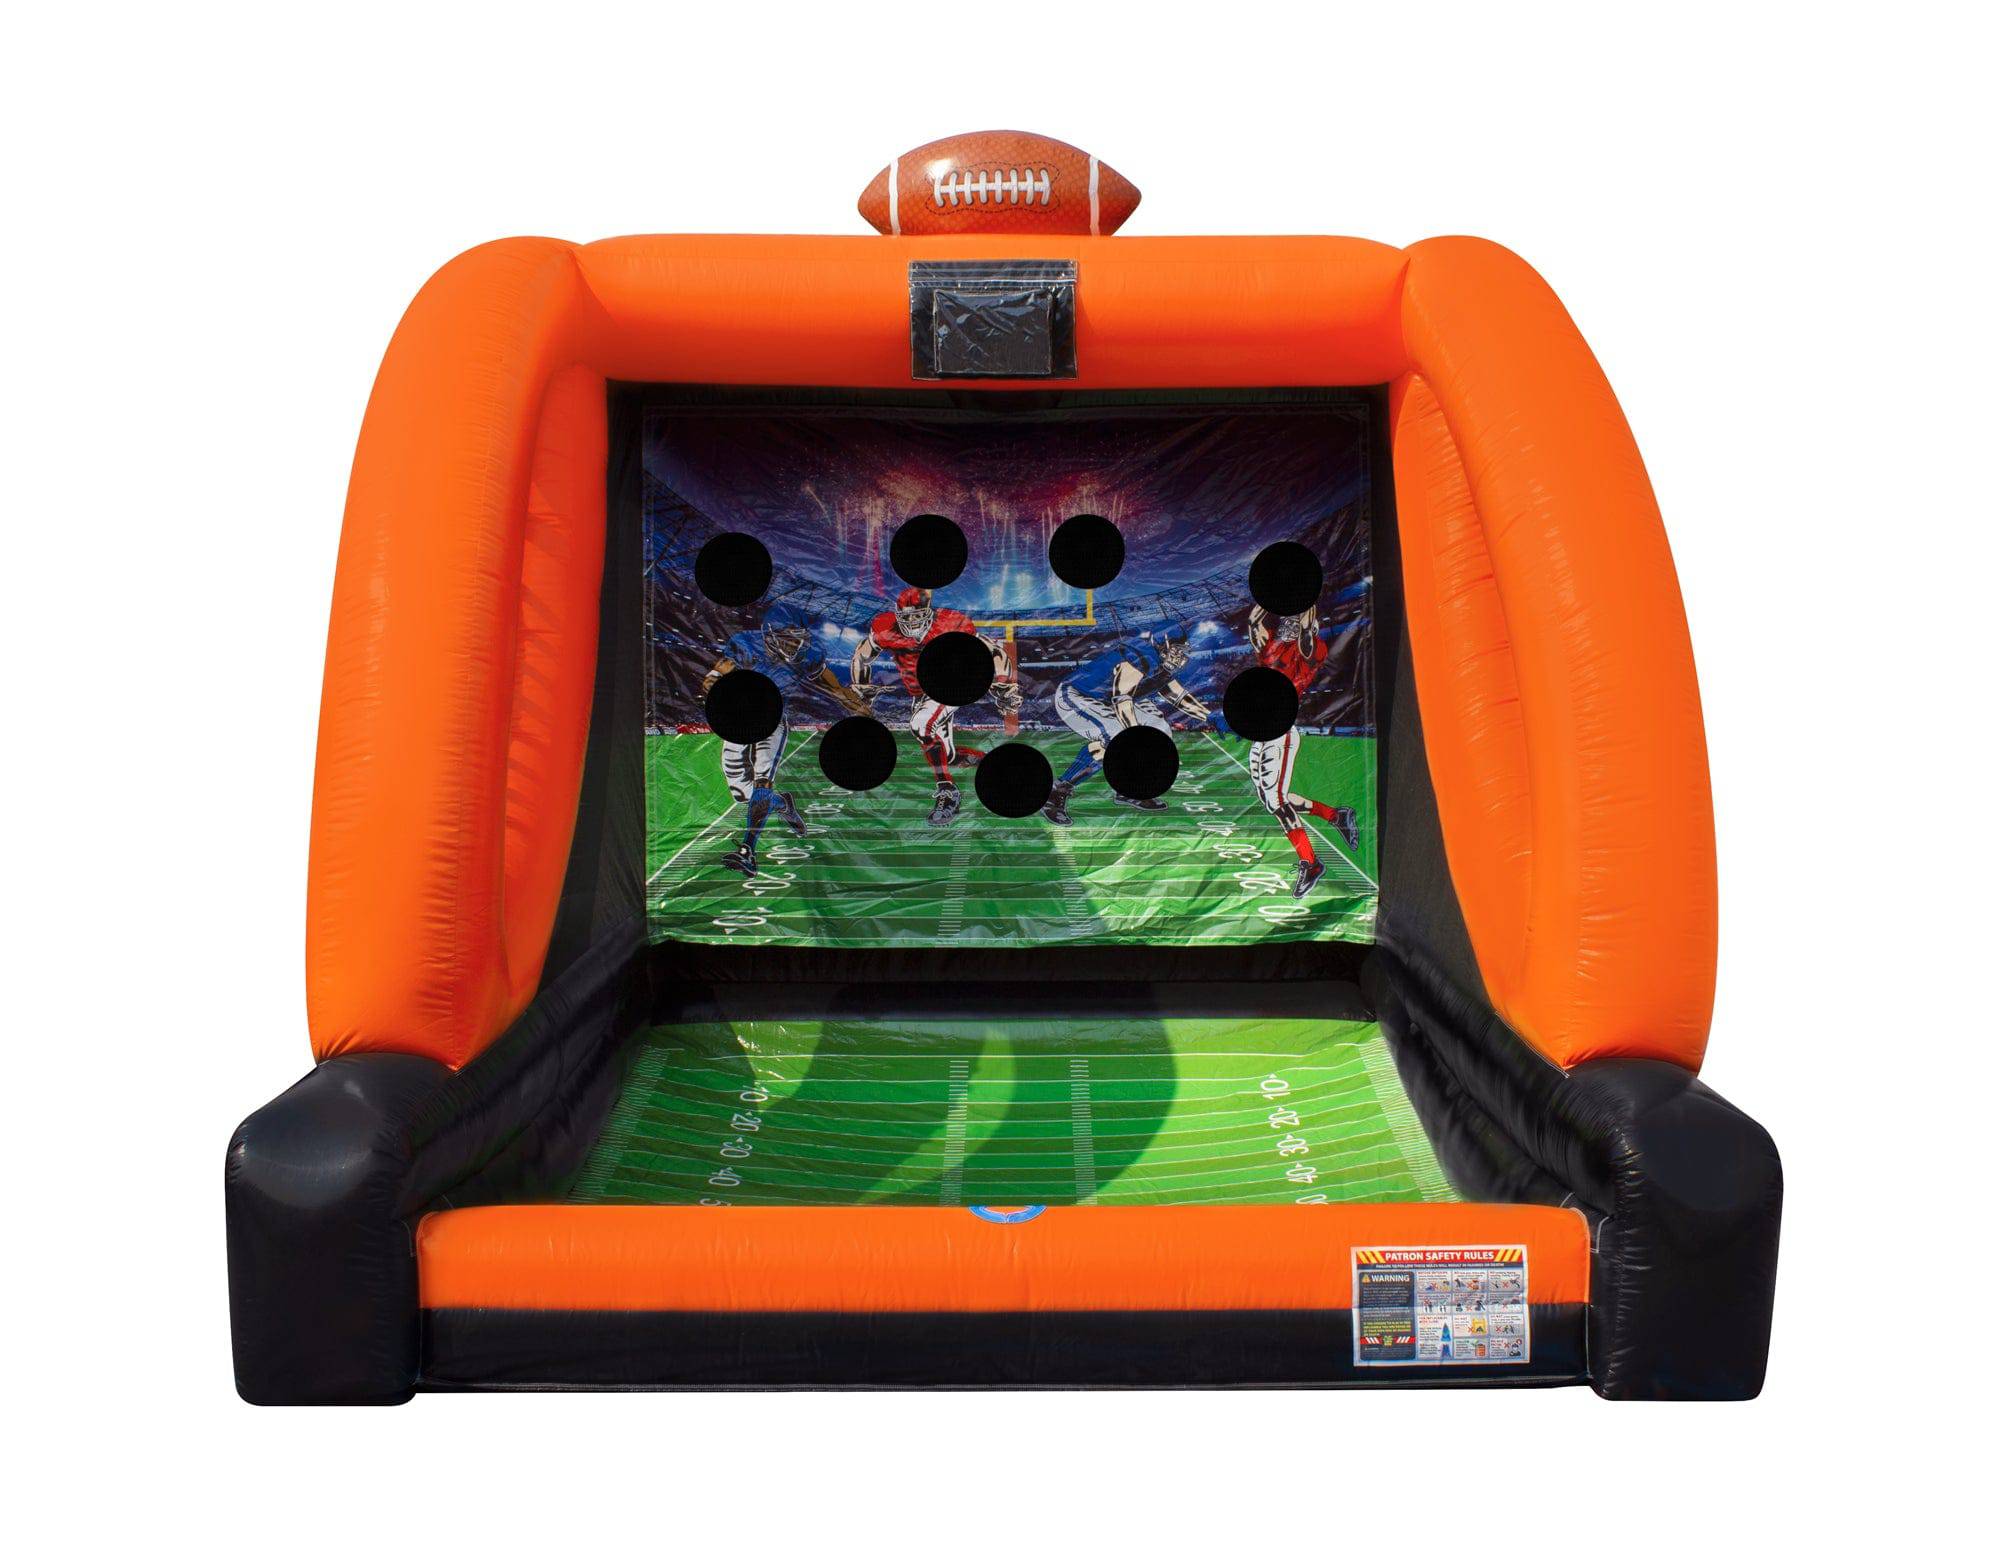 INFLATABLE GAMES